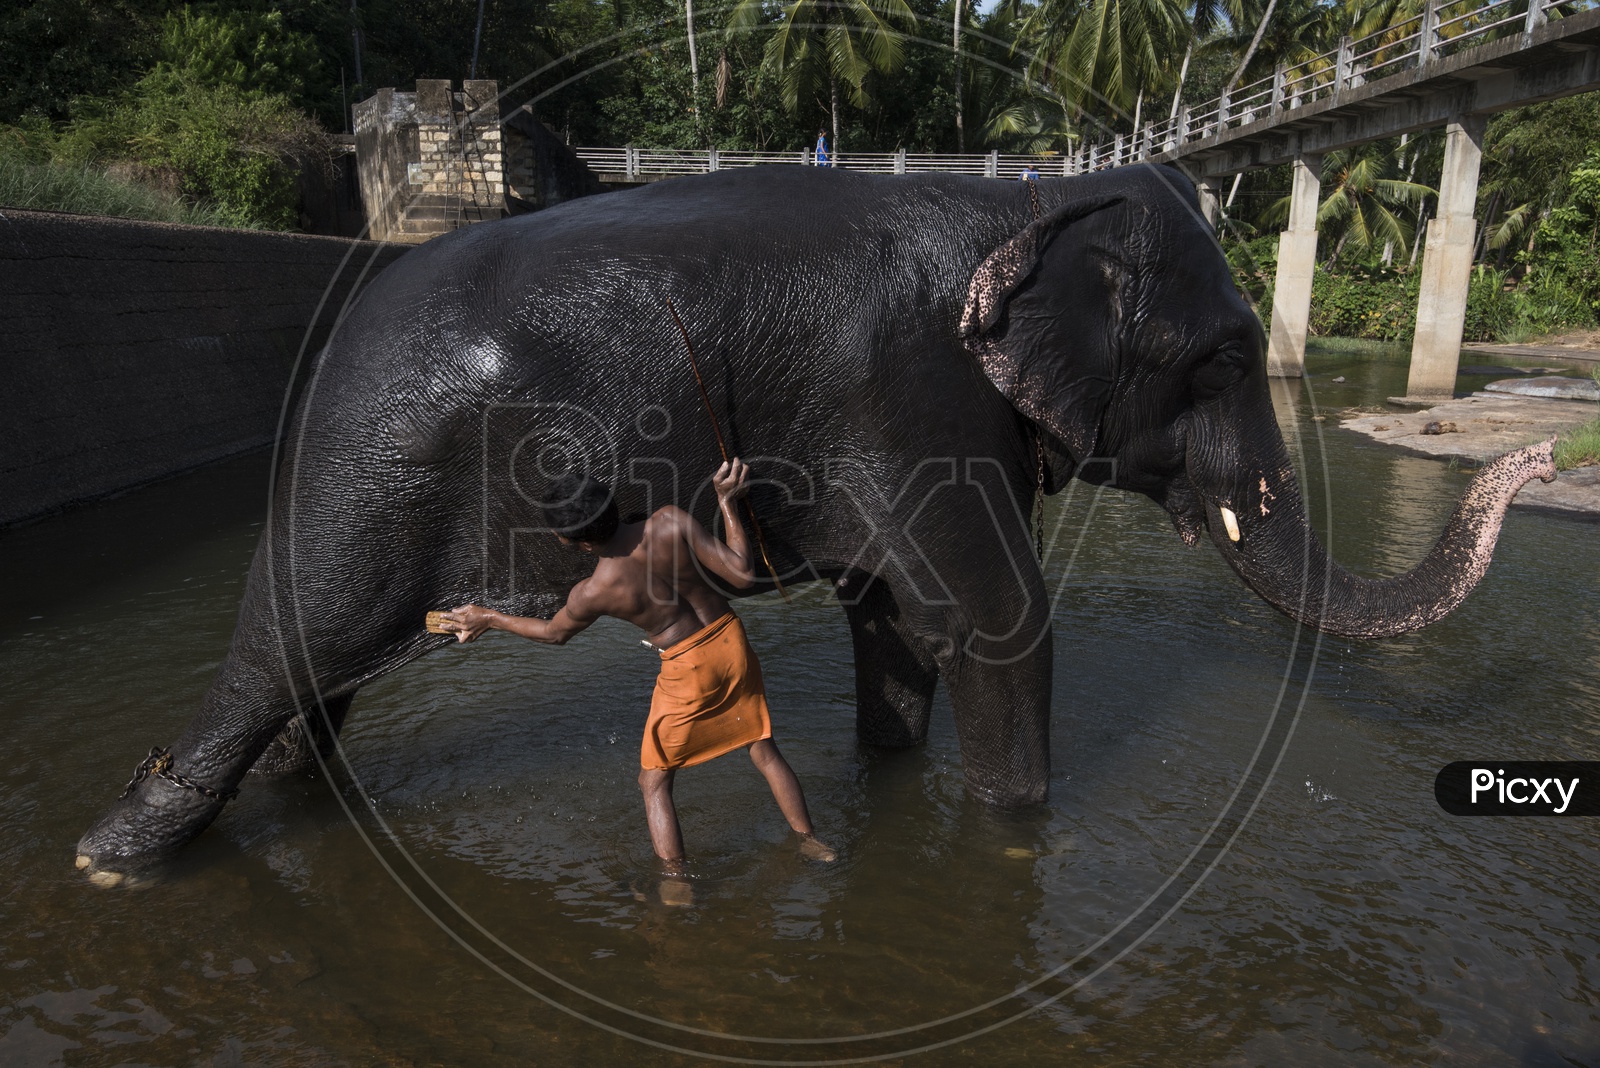 Man Cleaning Elephant